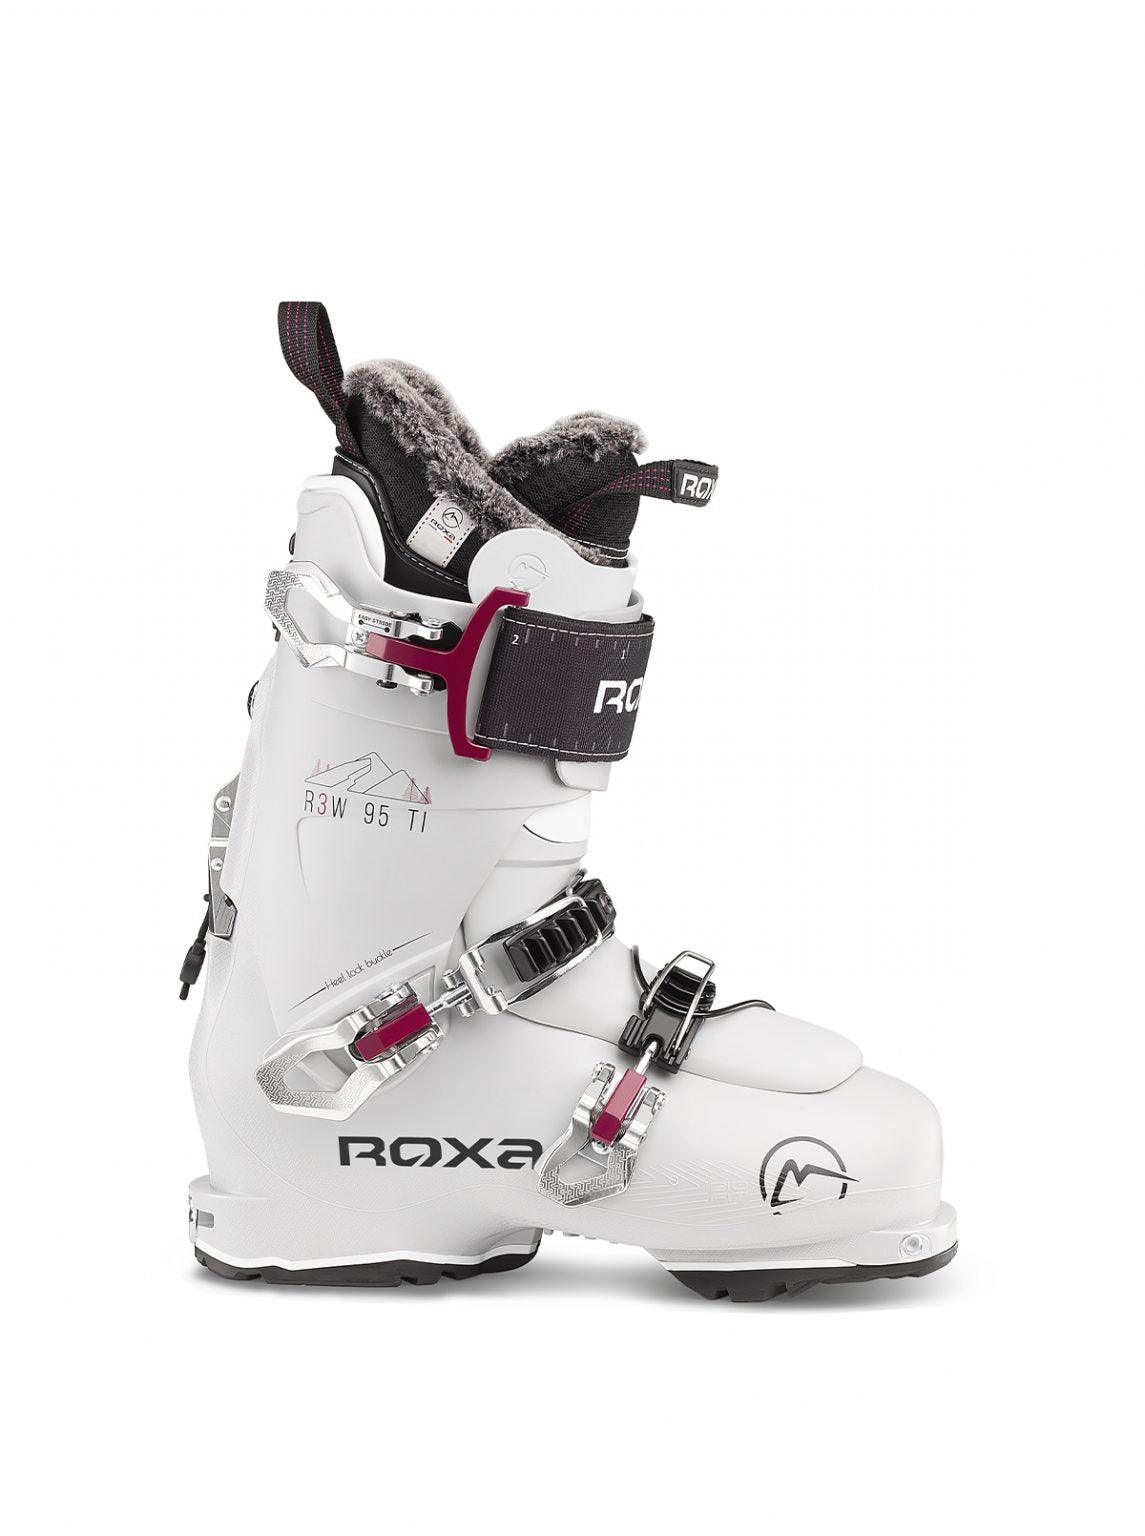 women's backcountry touring ski boot by Roxa in white with three buckles